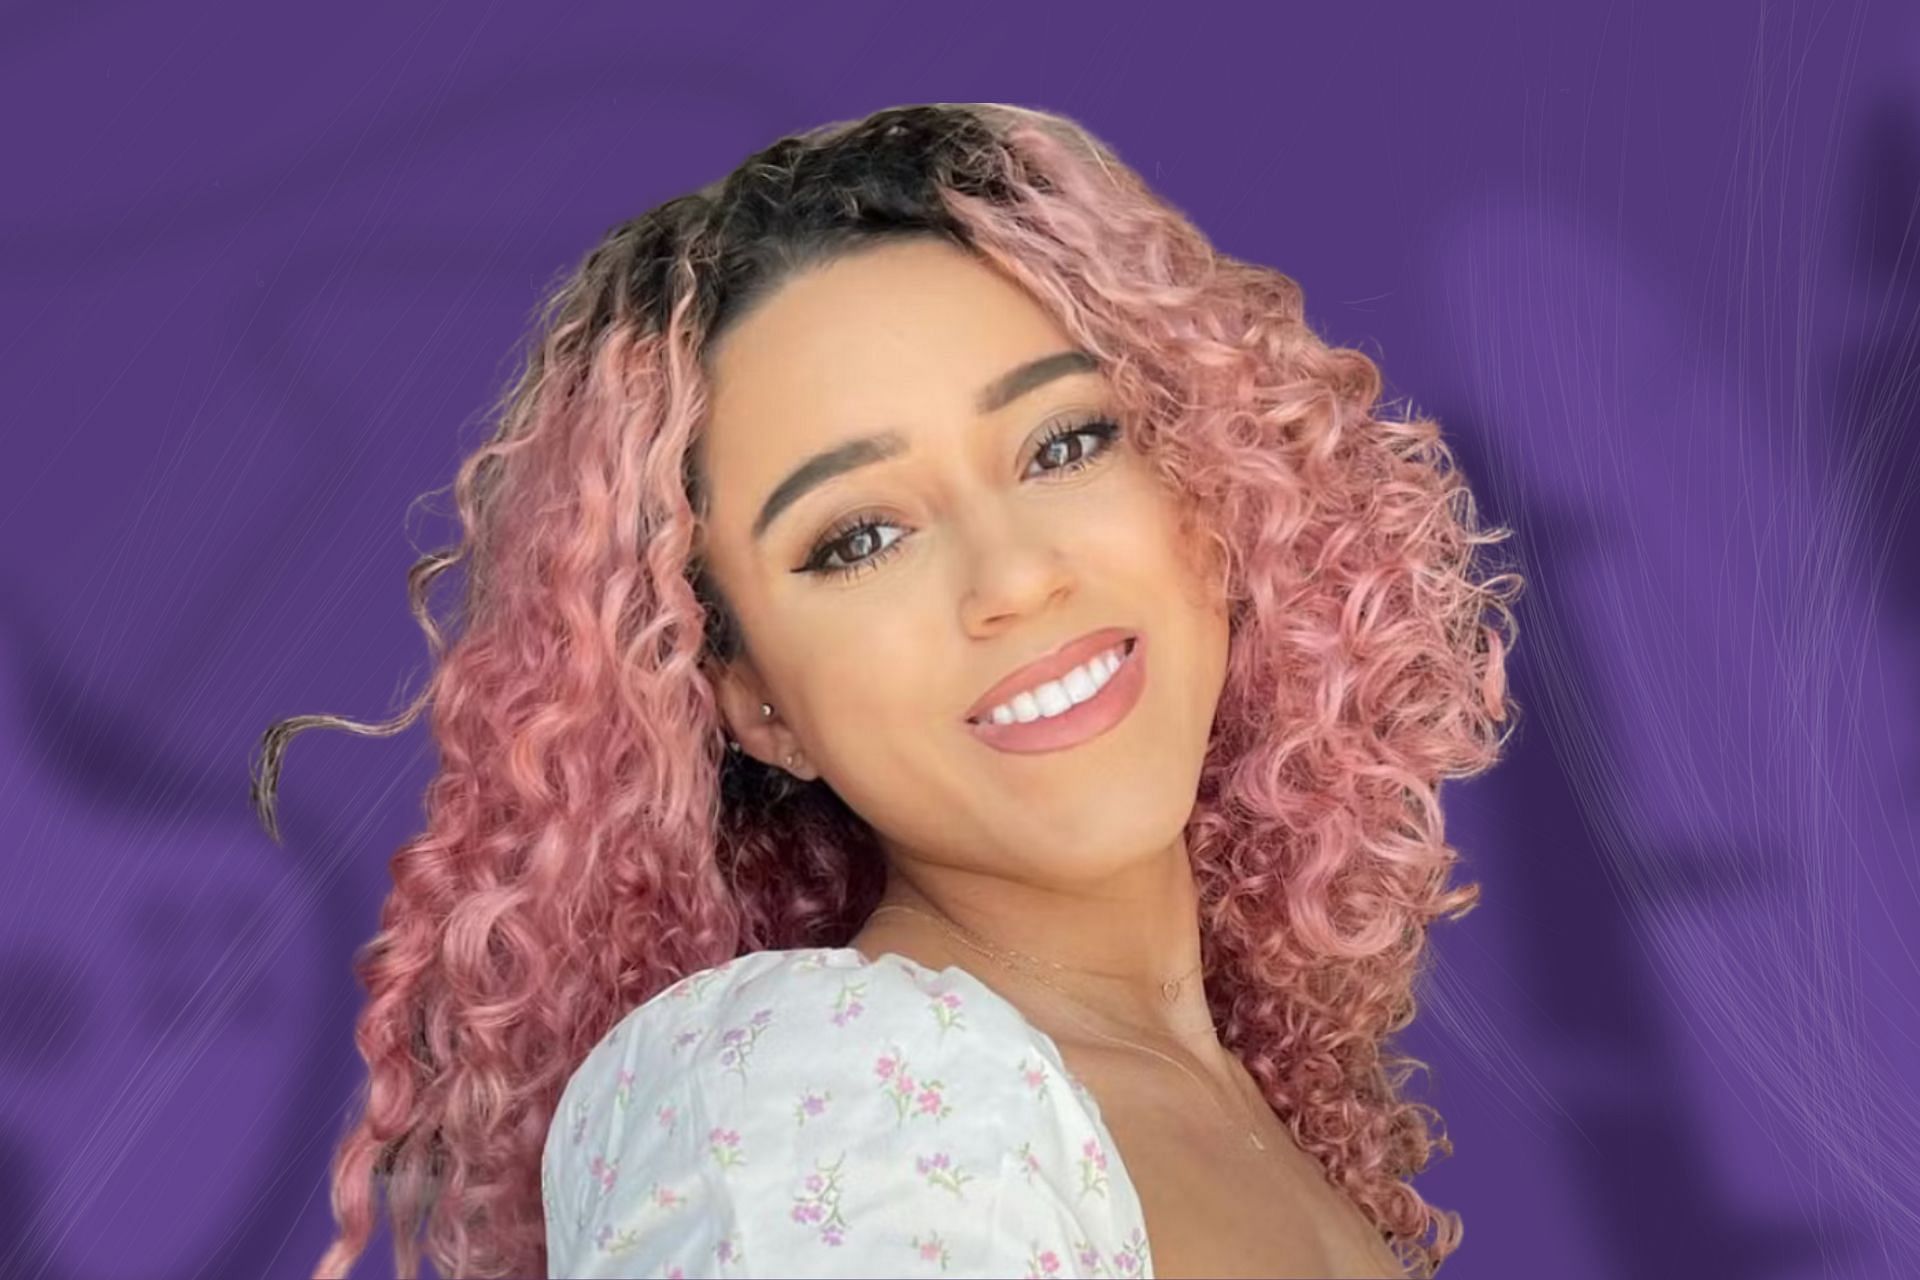 Macaiyla fuels the streamer drama by revealing some bits about her 2020 Austin, Texas visit (Image via Sportskeeda)